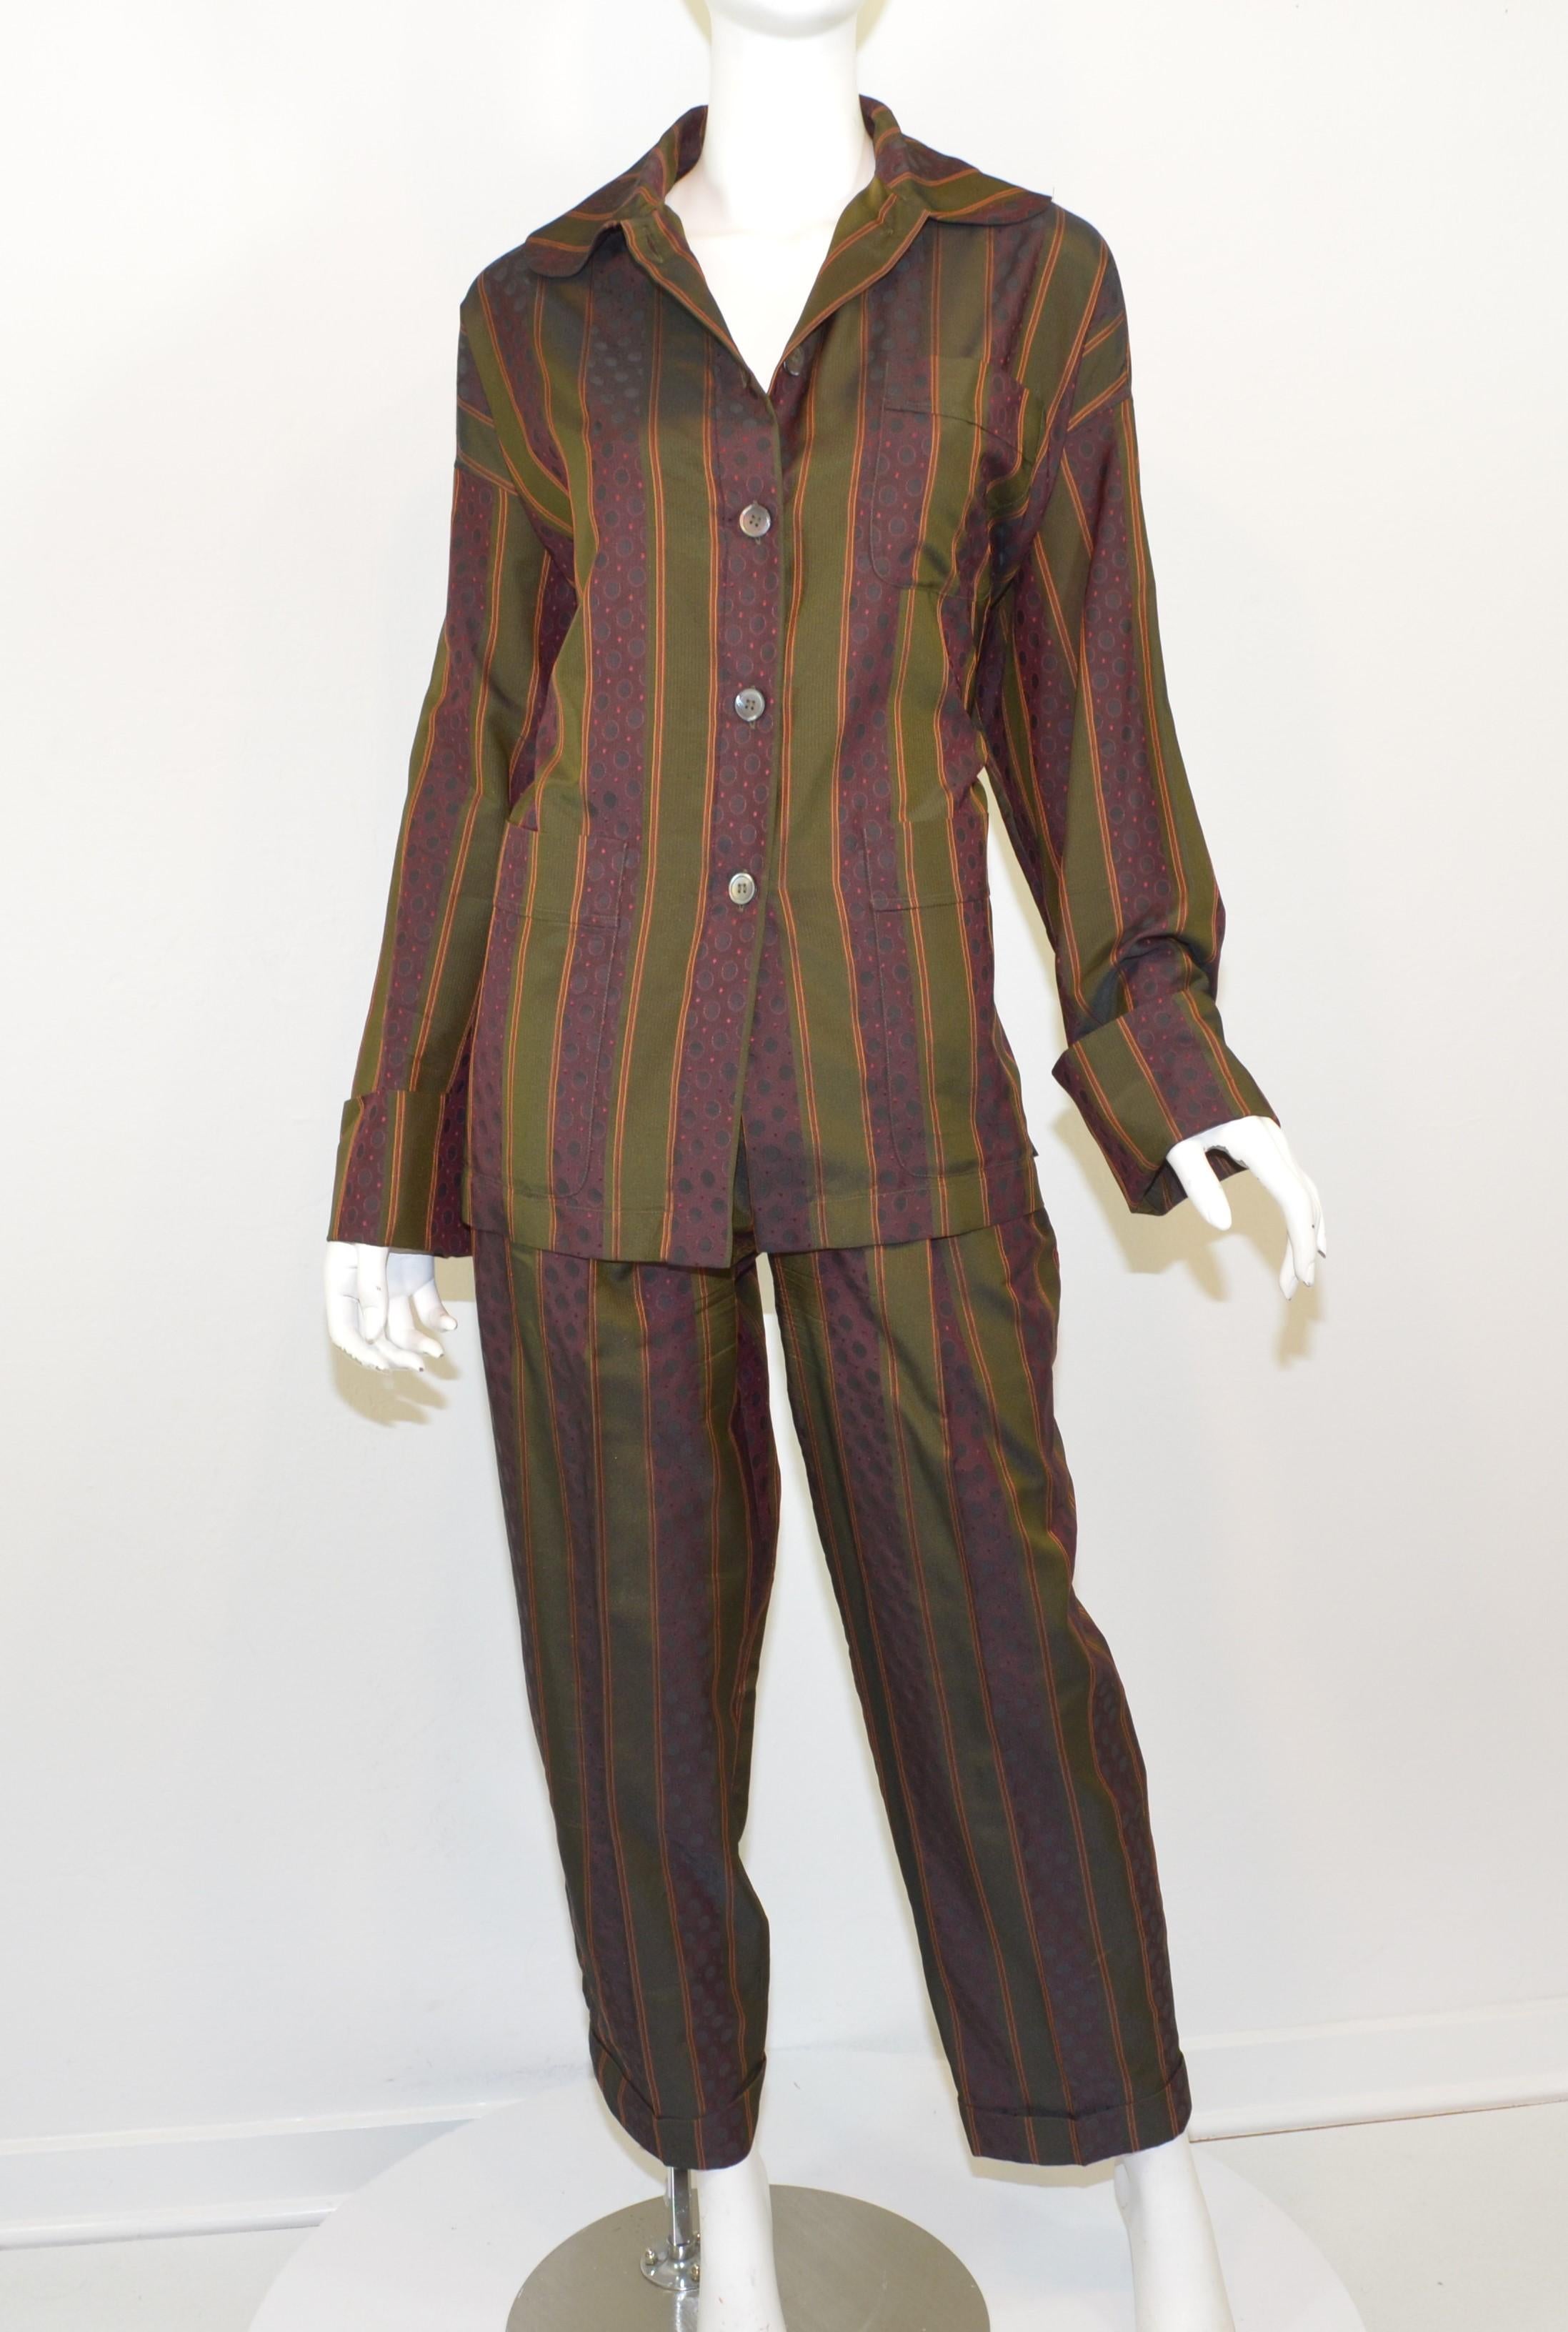 Romeo Gigli pant and top sleepwear set featured in olive green and maroon with an optical design throughout. Top has button fastenings and two functional pockets at the bust. Top is labeled size 42 and pants are a size 44. Set is composed with a